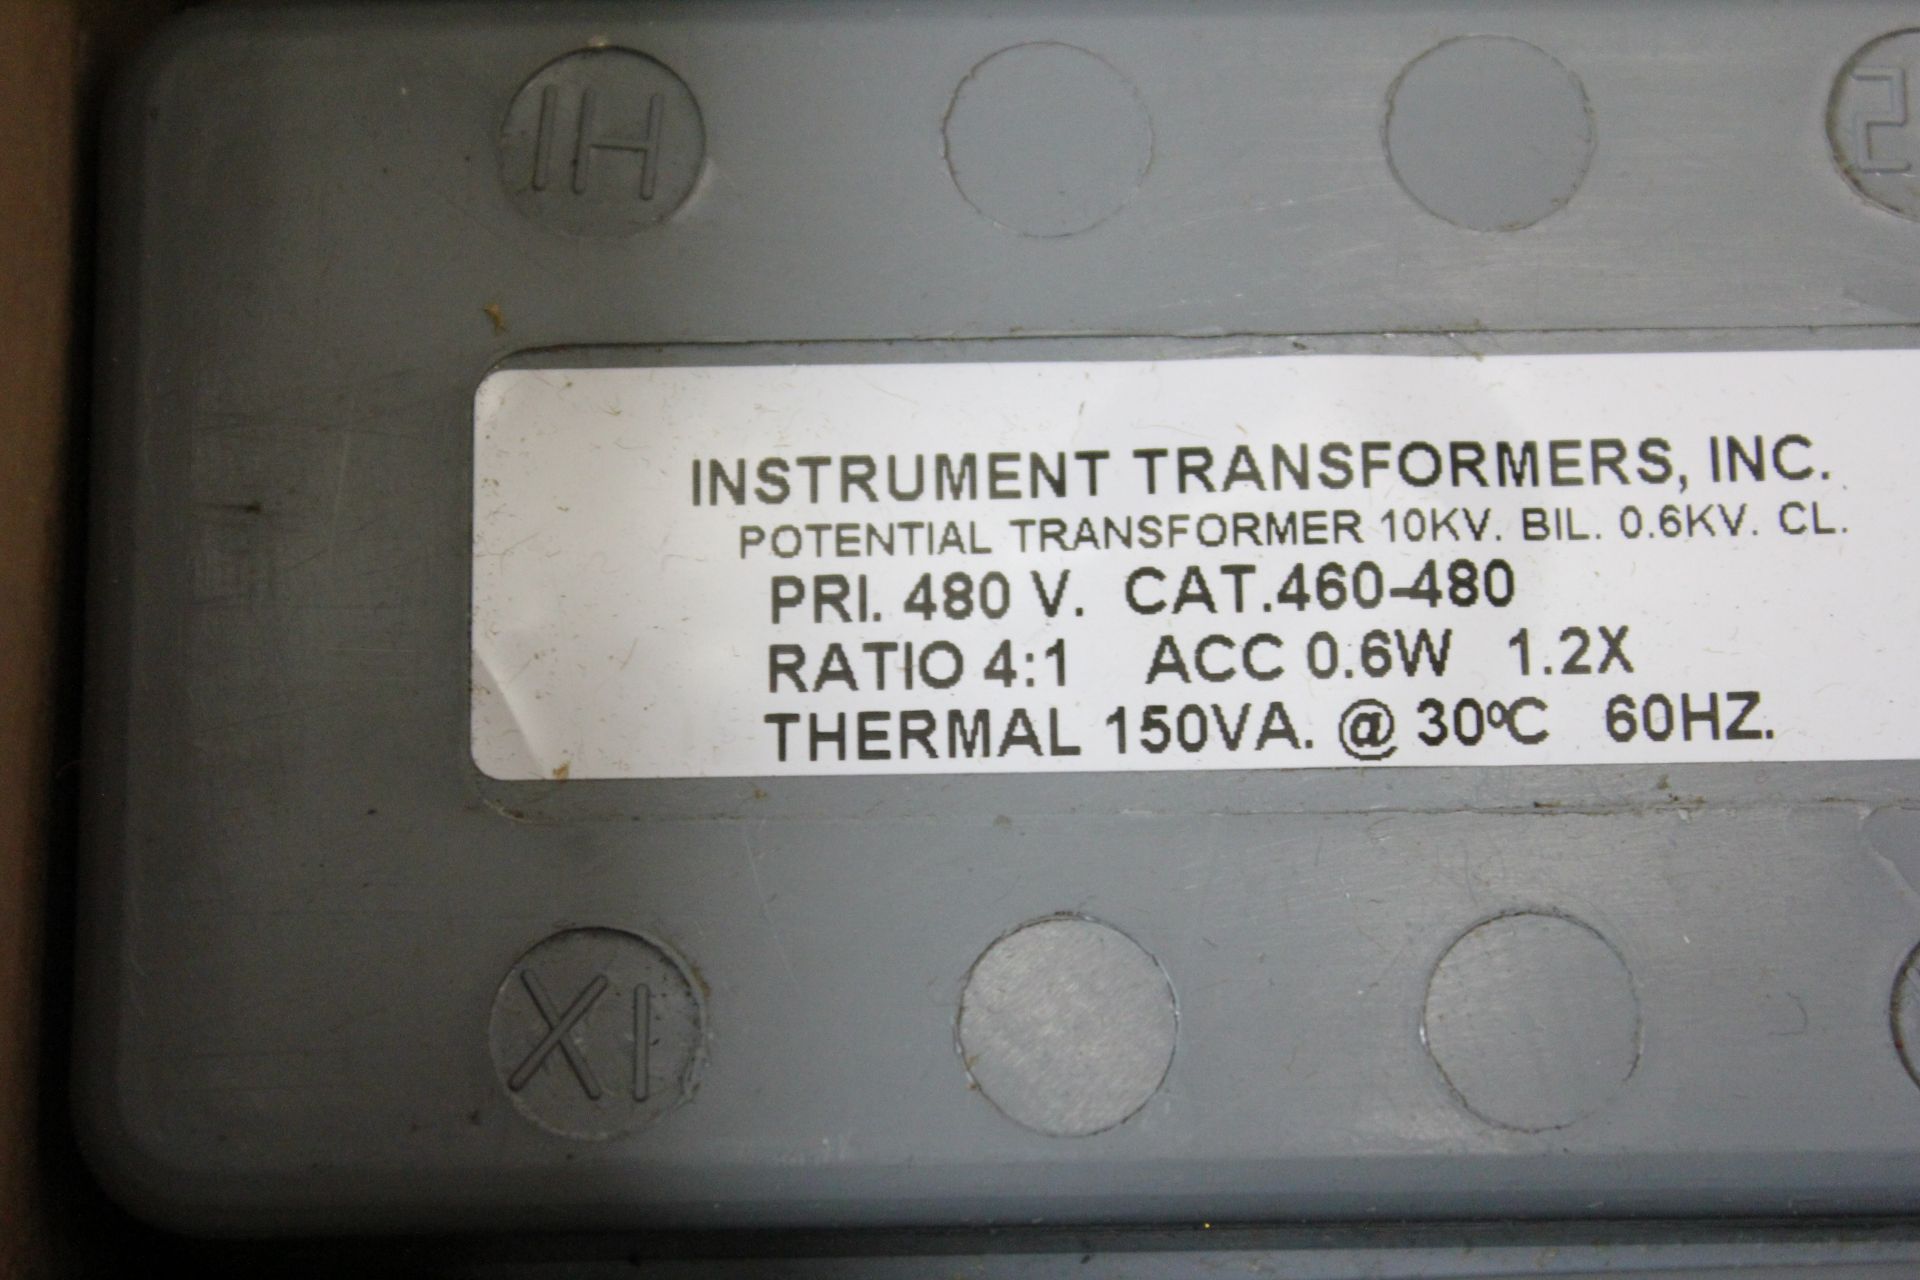 NEW INSTRUMENT TRANSFORMERS POTENTIAL TRANSFORMER - Image 2 of 3